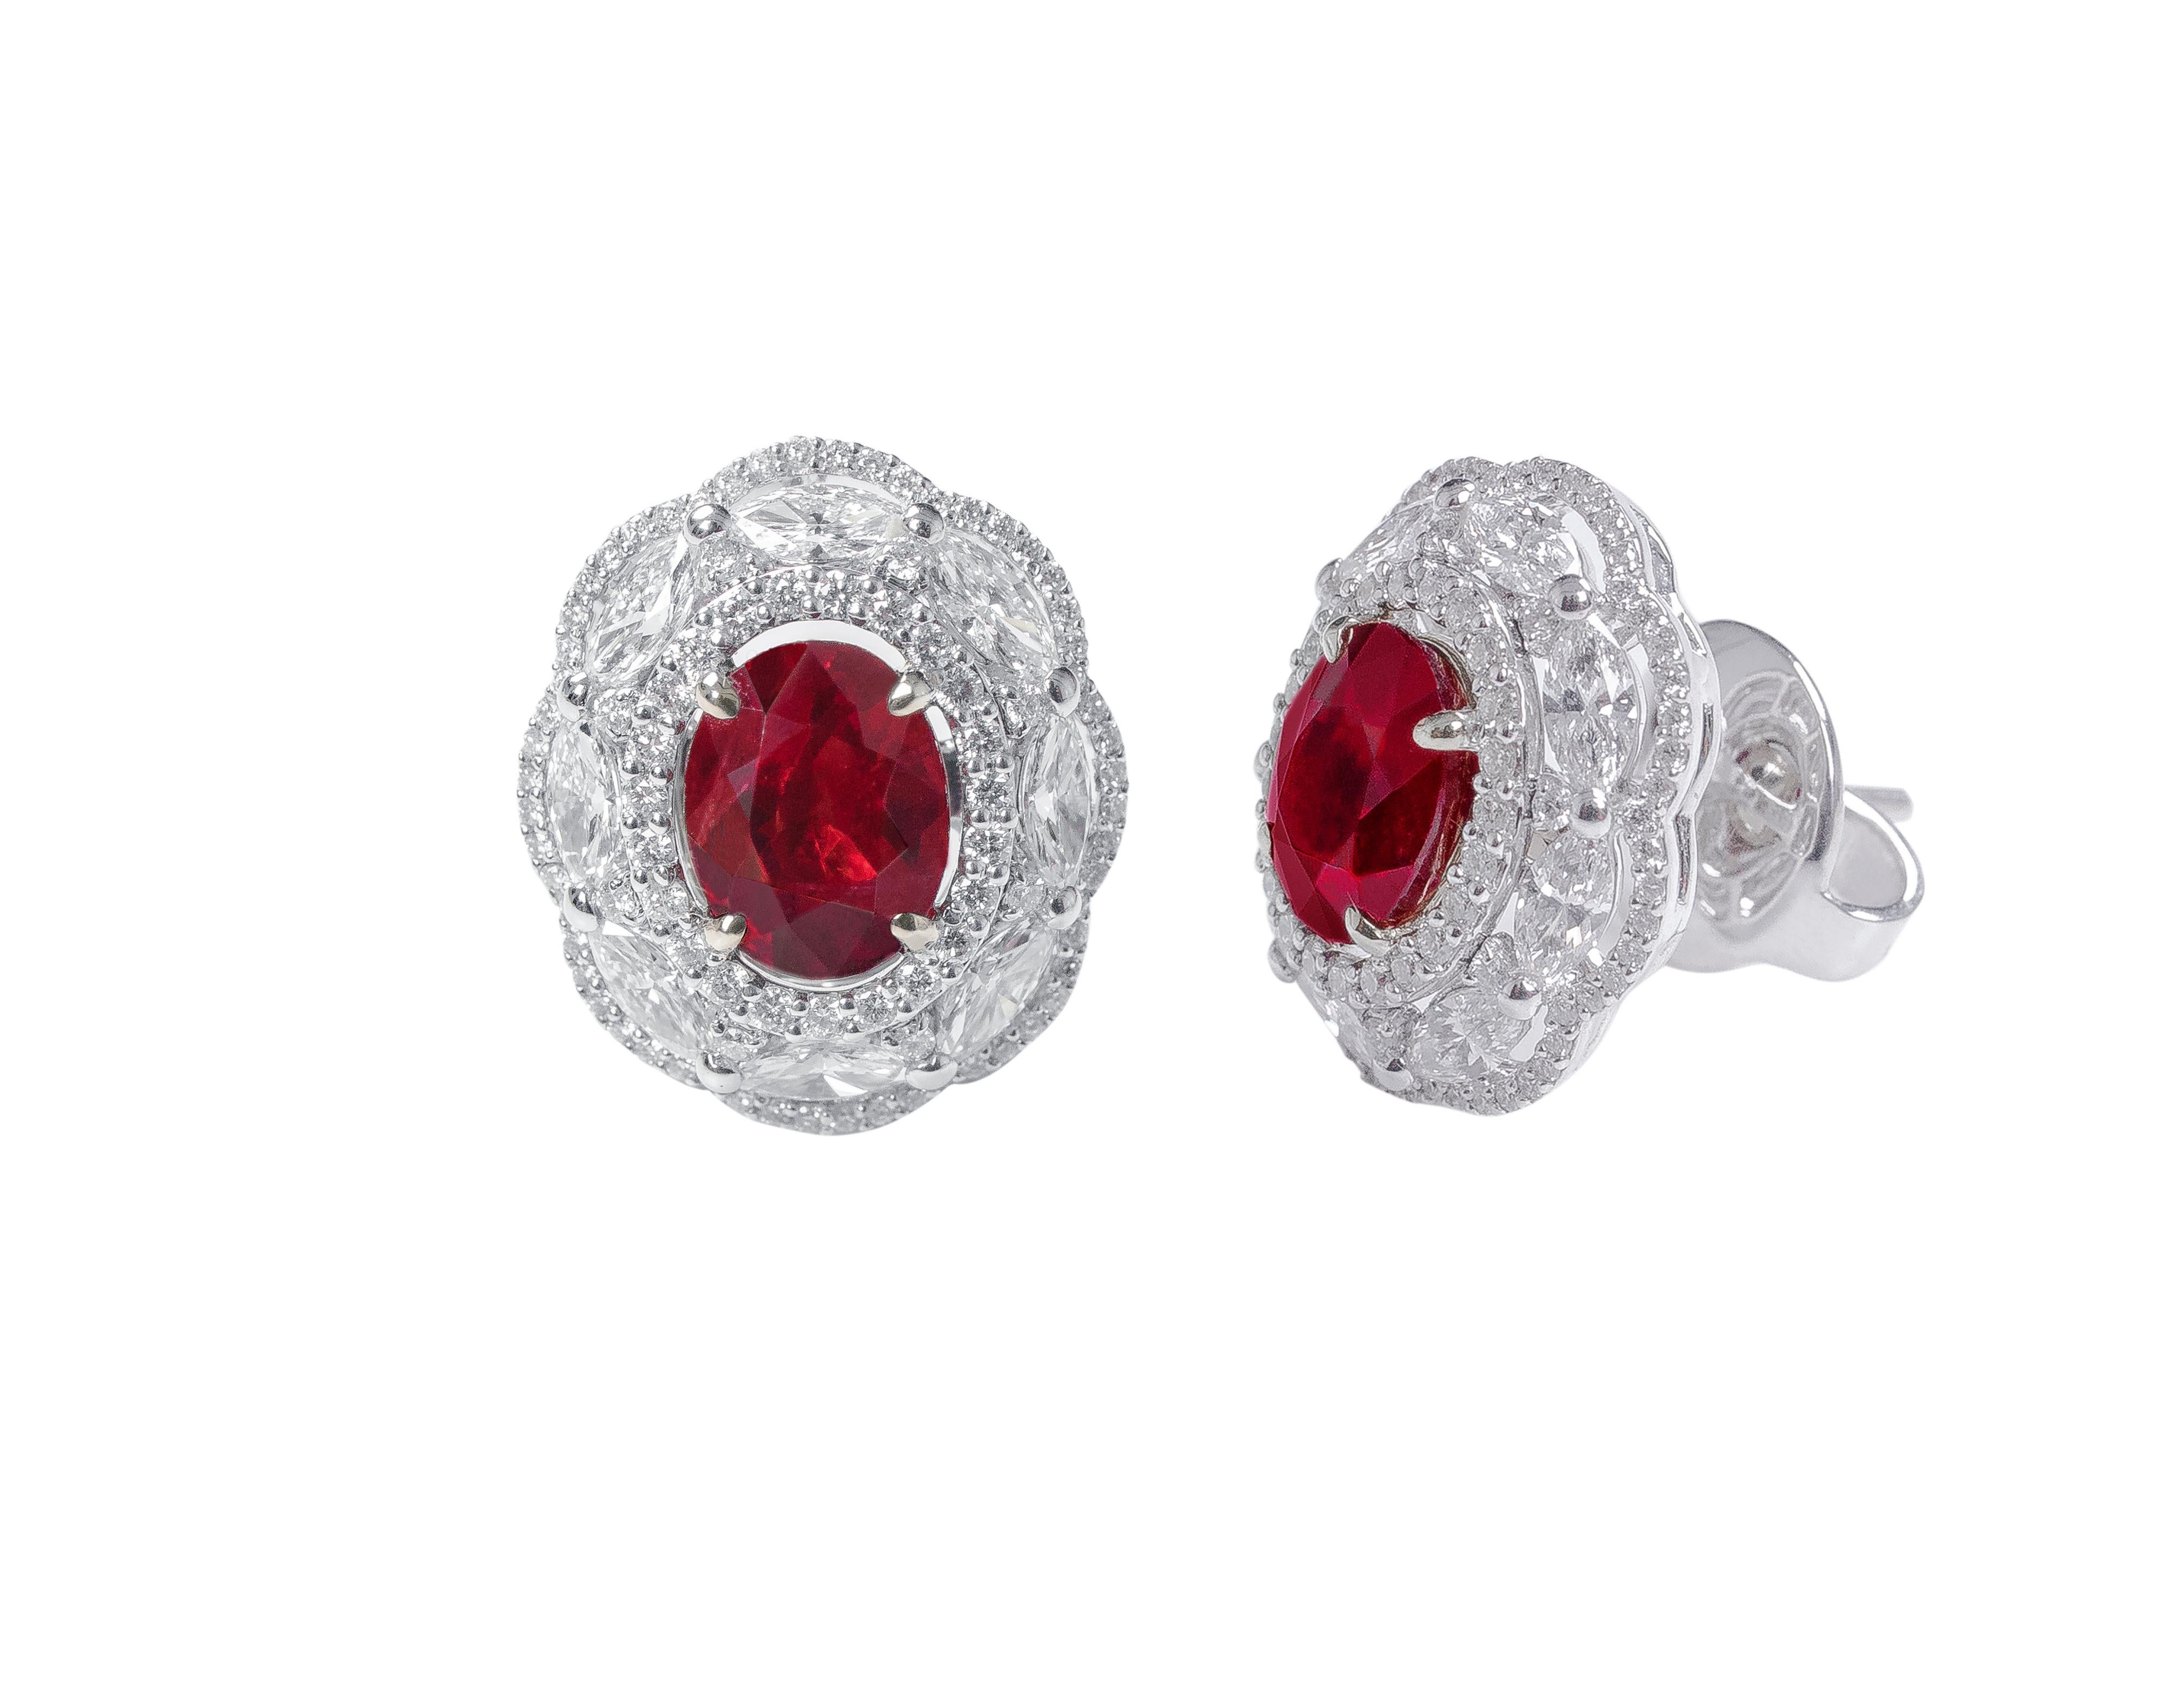 18 Karat White Gold 3.72 Carat Ruby and Diamond Cluster Stud Earrings

This regal pigeon blood ruby oval earring sets the tone for something special. The insensuous blood ruby pair is surrounded by a simple cluster of pave set diamonds and then by